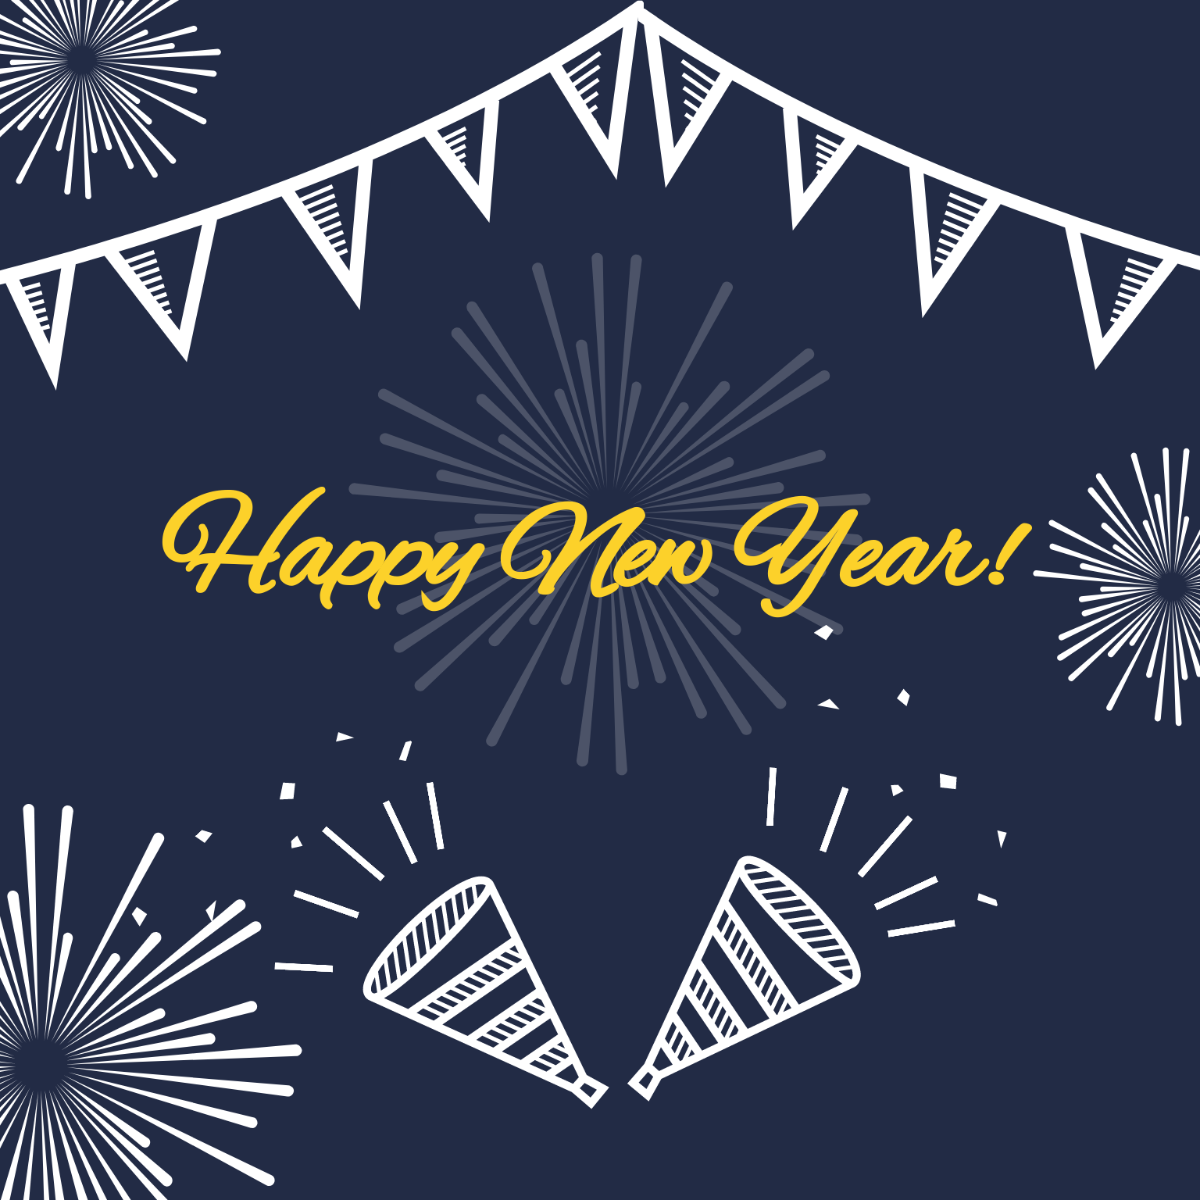 New Year's Day Sketch Vector Template